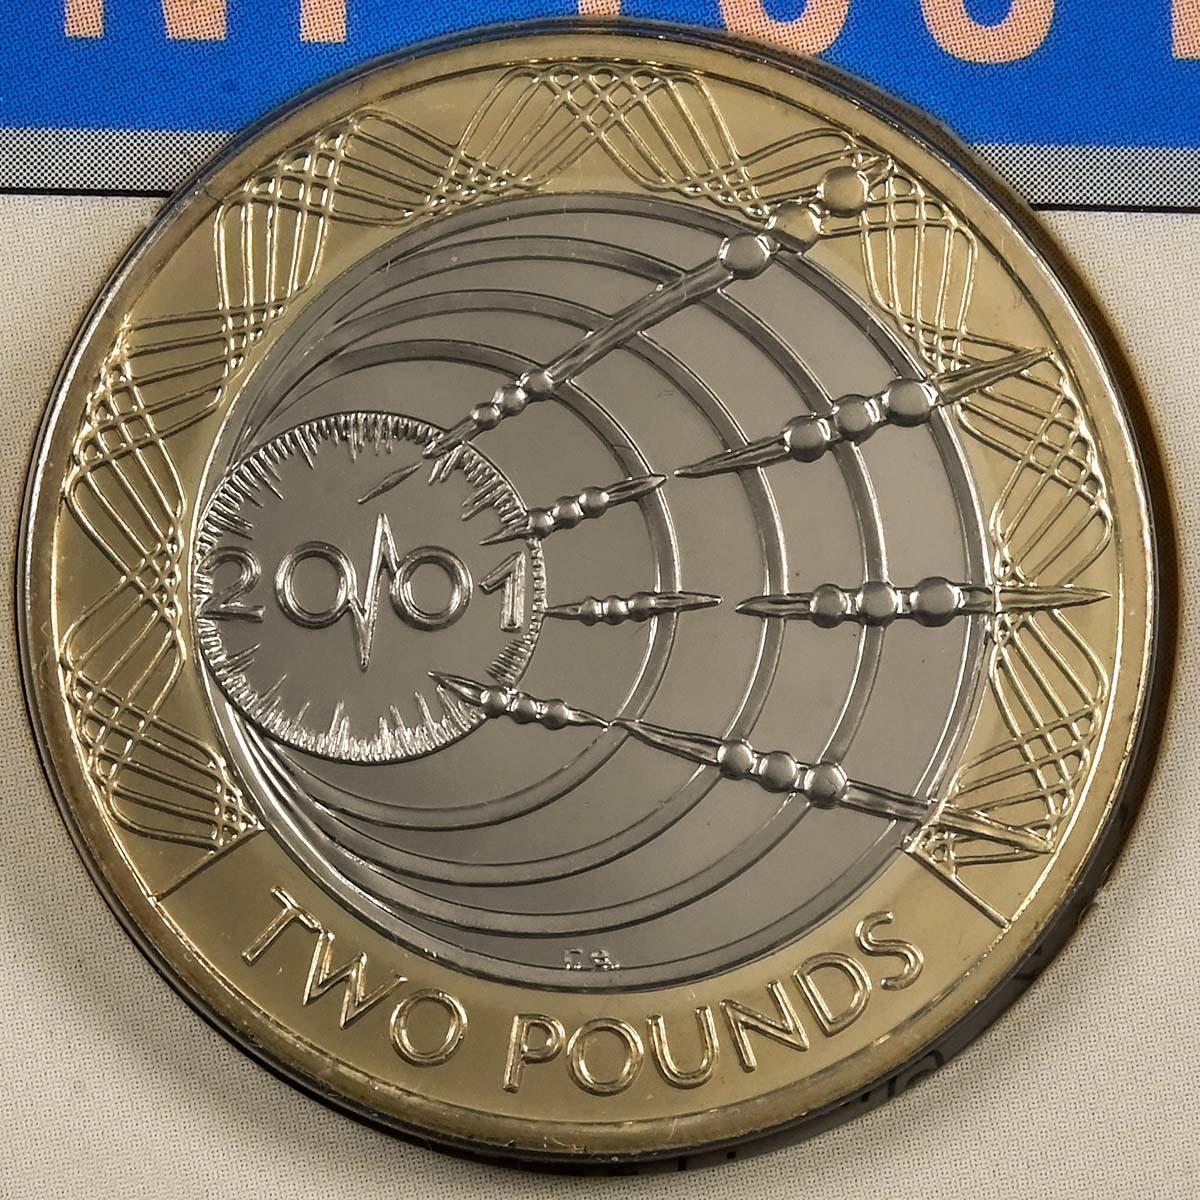 2001 Marconi First Wireless Transmission £2 Brilliant Uncirculated In Folder Reverse